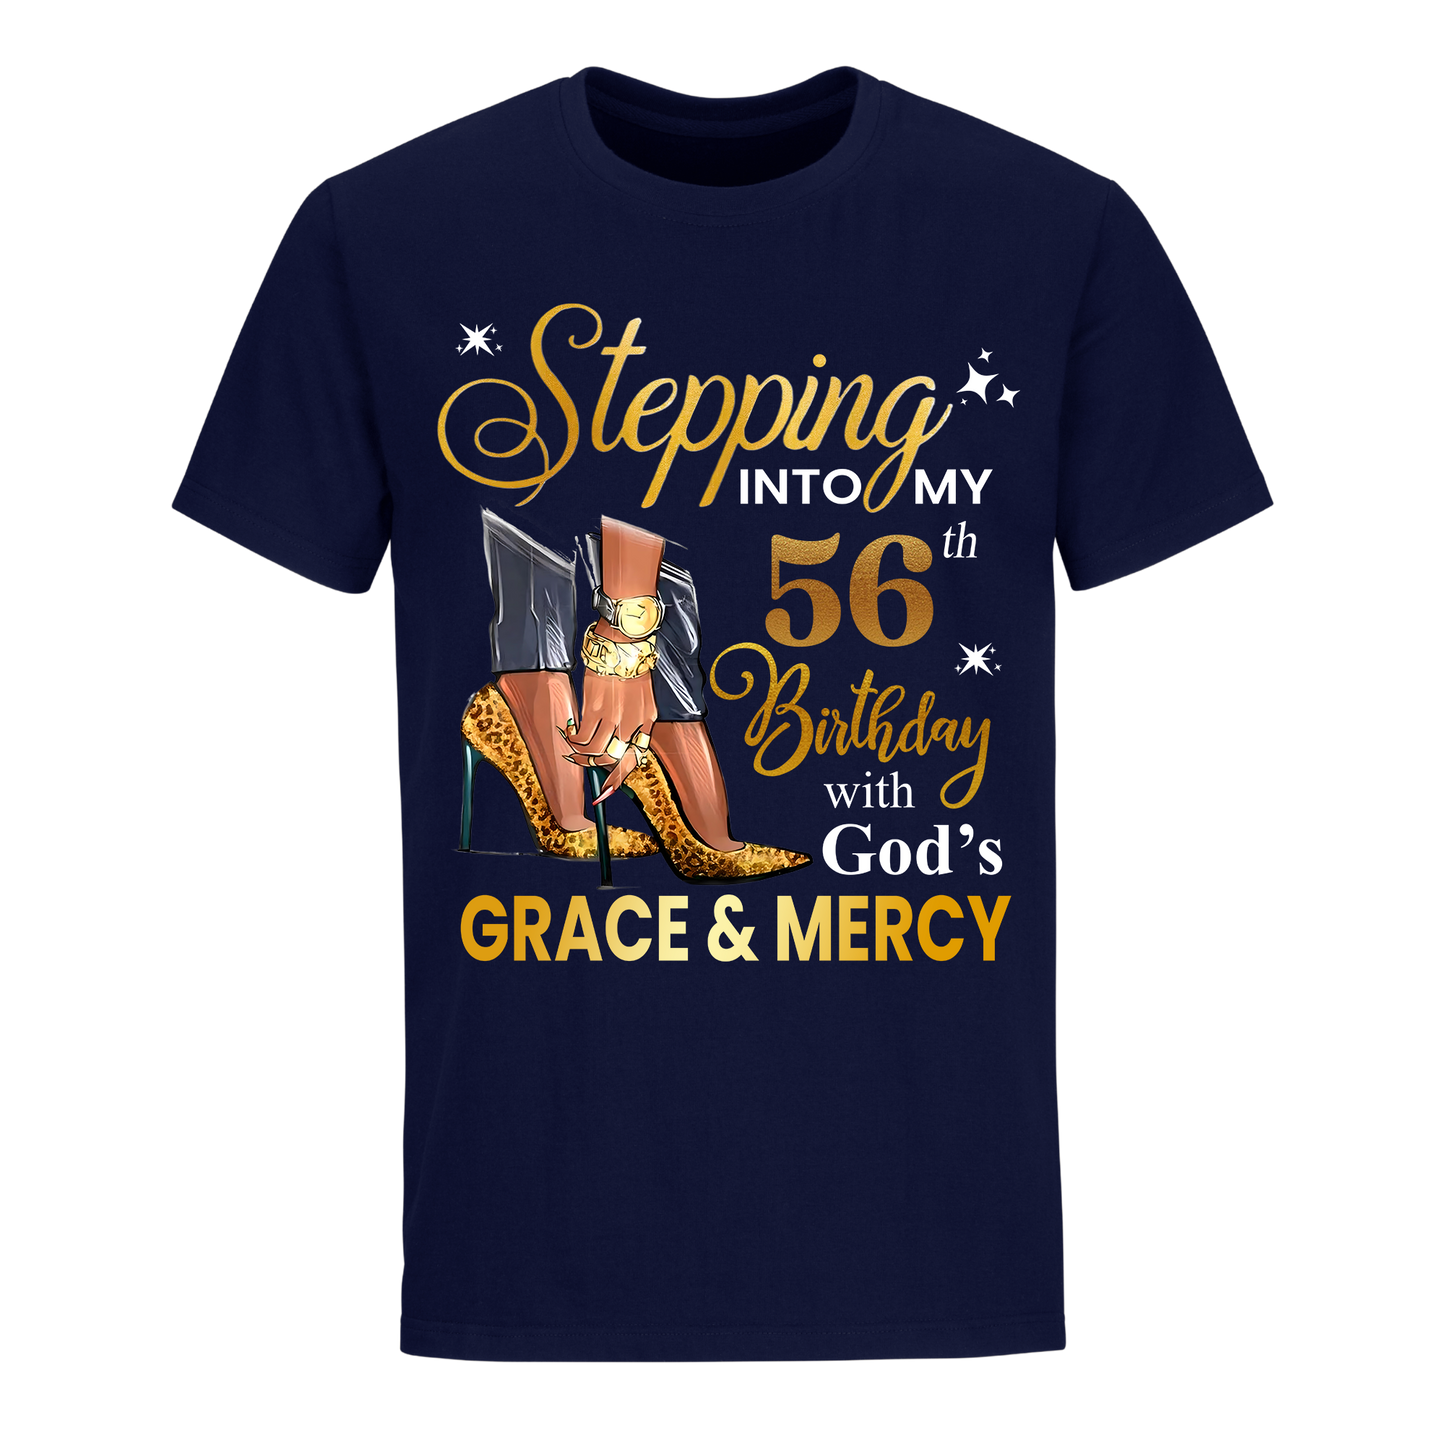 STEPPING INTO MY GRACE AND MERCY 56TH BIRTHDAY UNISEX SHIRT